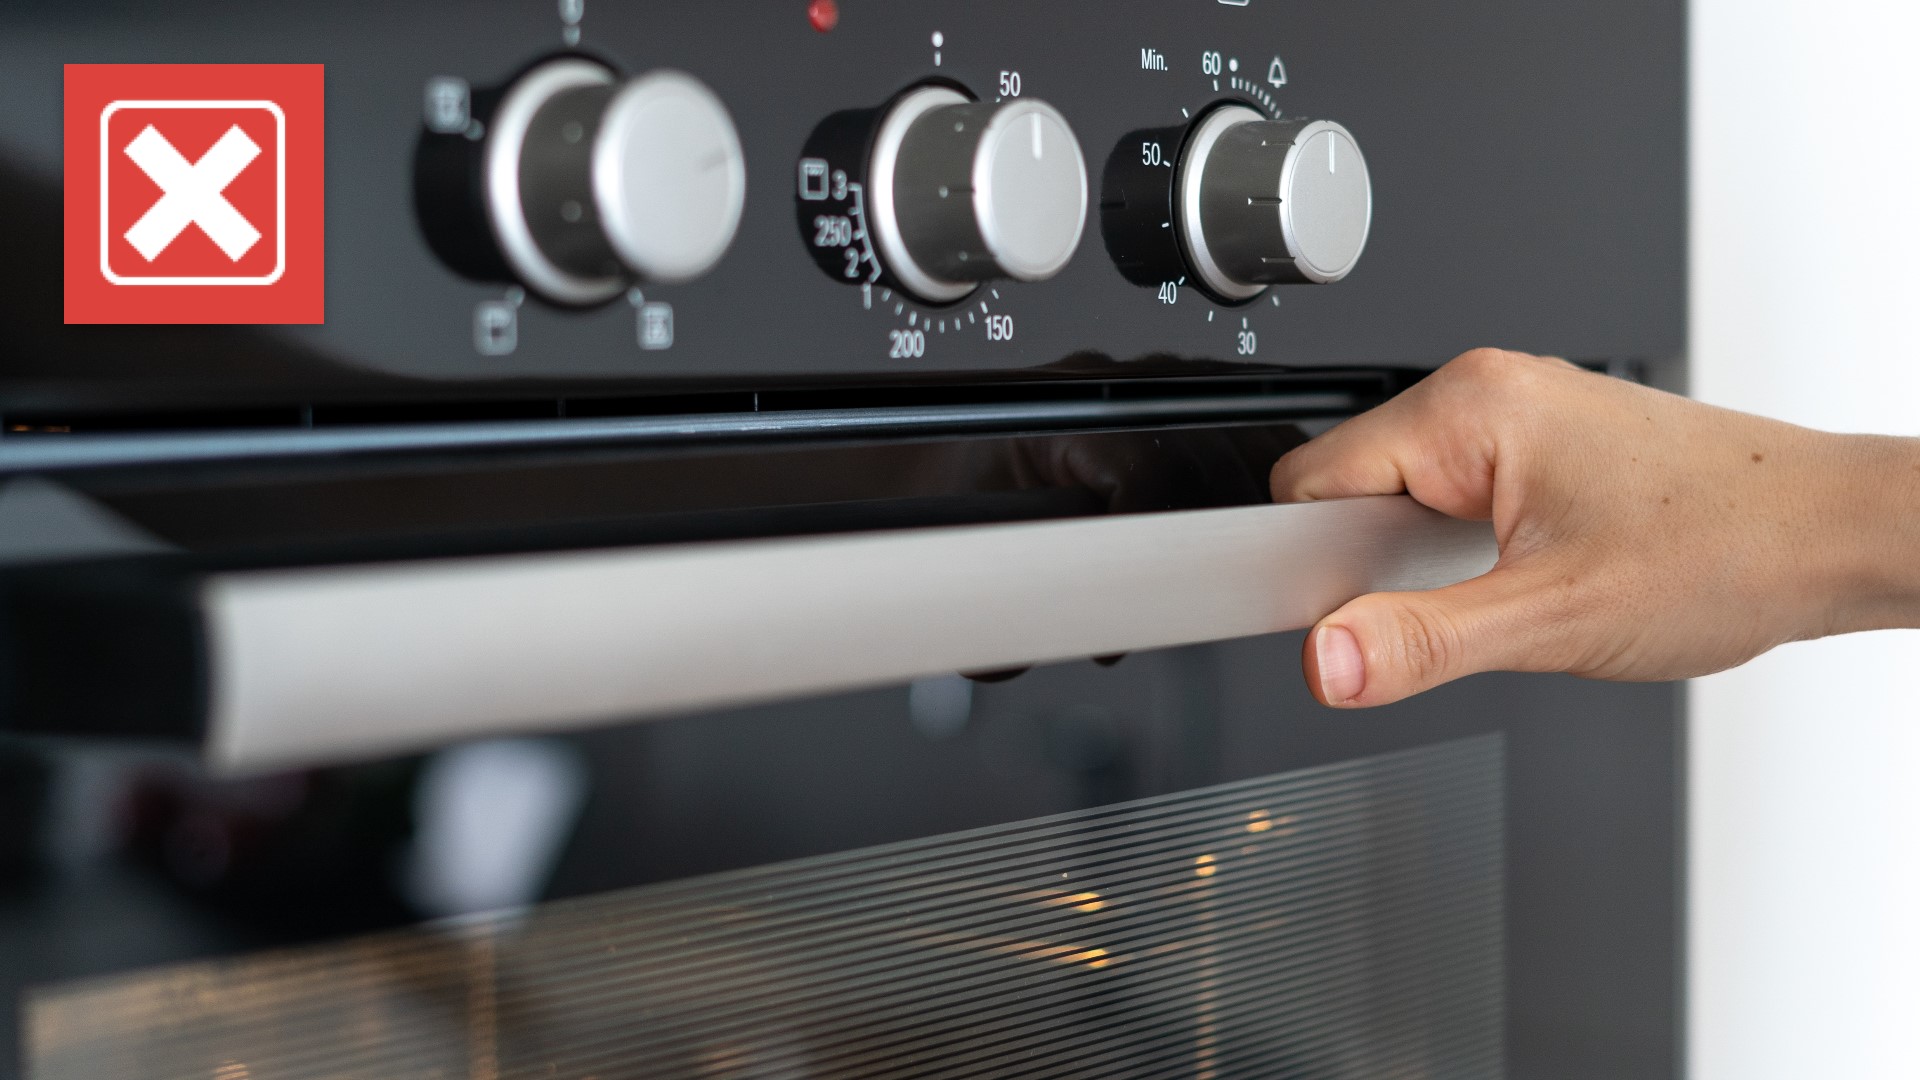 Gas and electric ovens are not designed to heat houses. They pose fire and carbon monoxide poisoning risks if they are left on for too long.